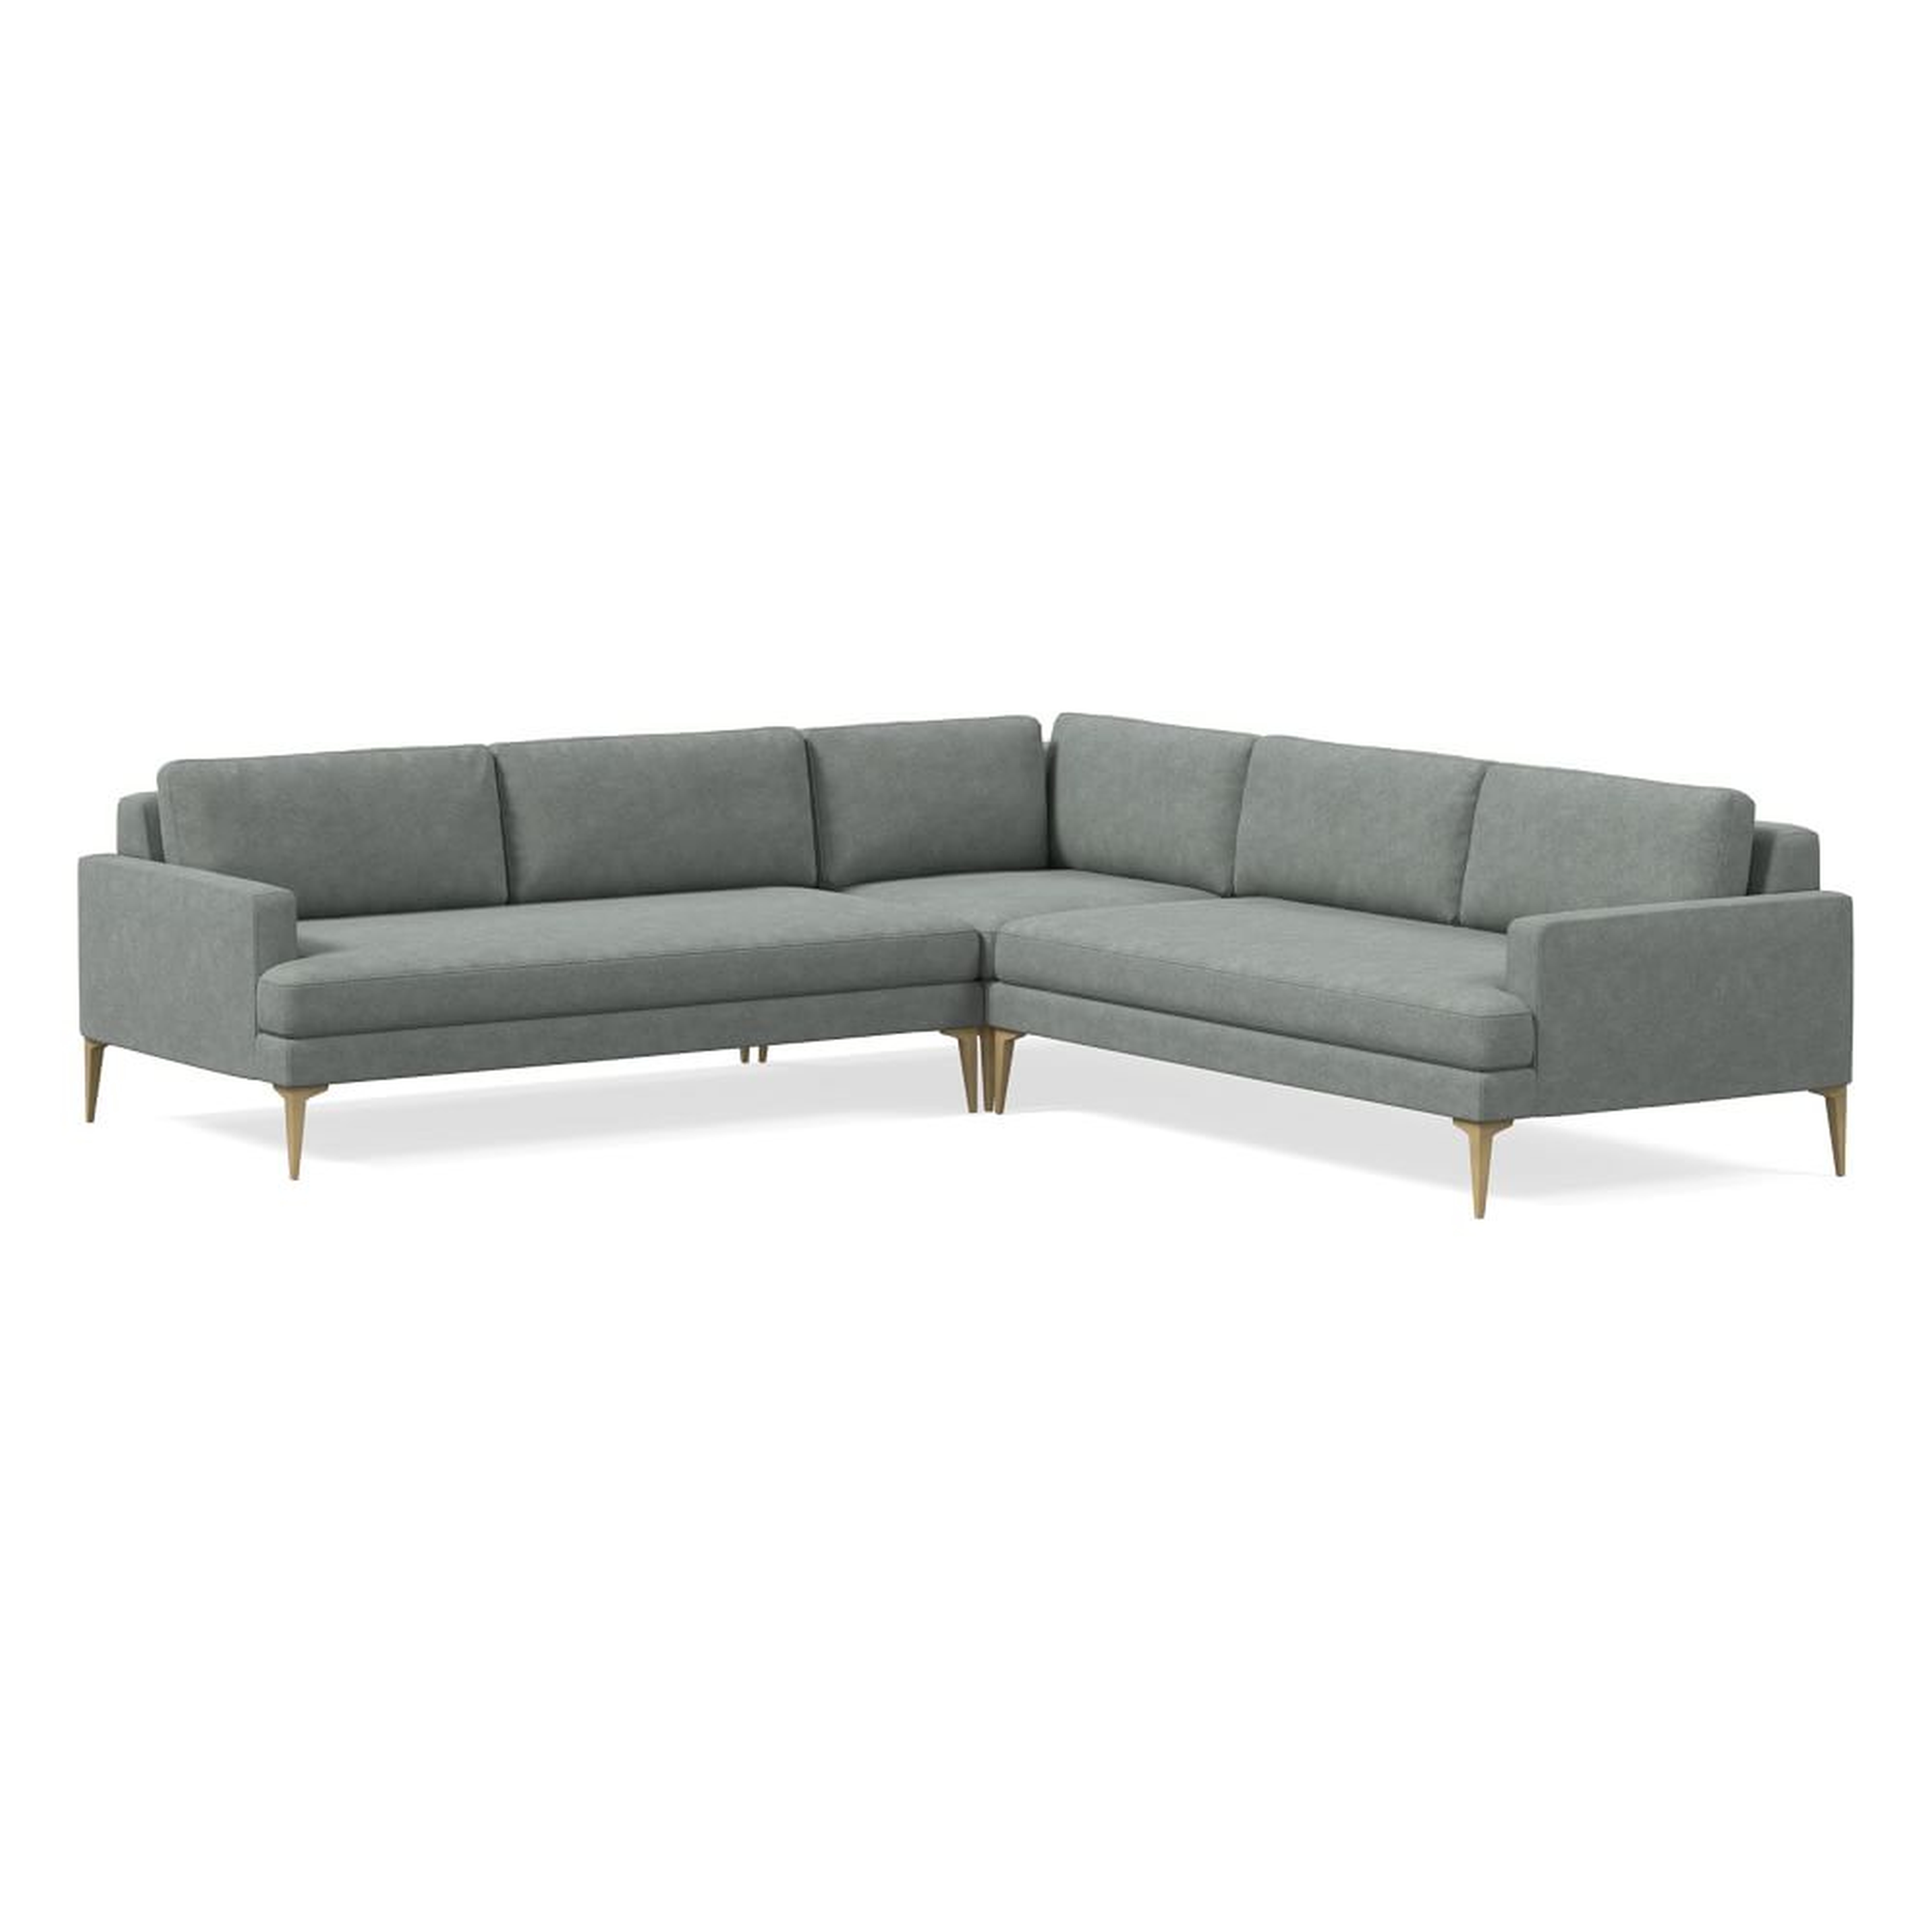 Andes 105" Multi Seat 3-Piece L-Shaped Sectional, Standard Depth, Distressed Velvet, Mineral Gray, BB - West Elm